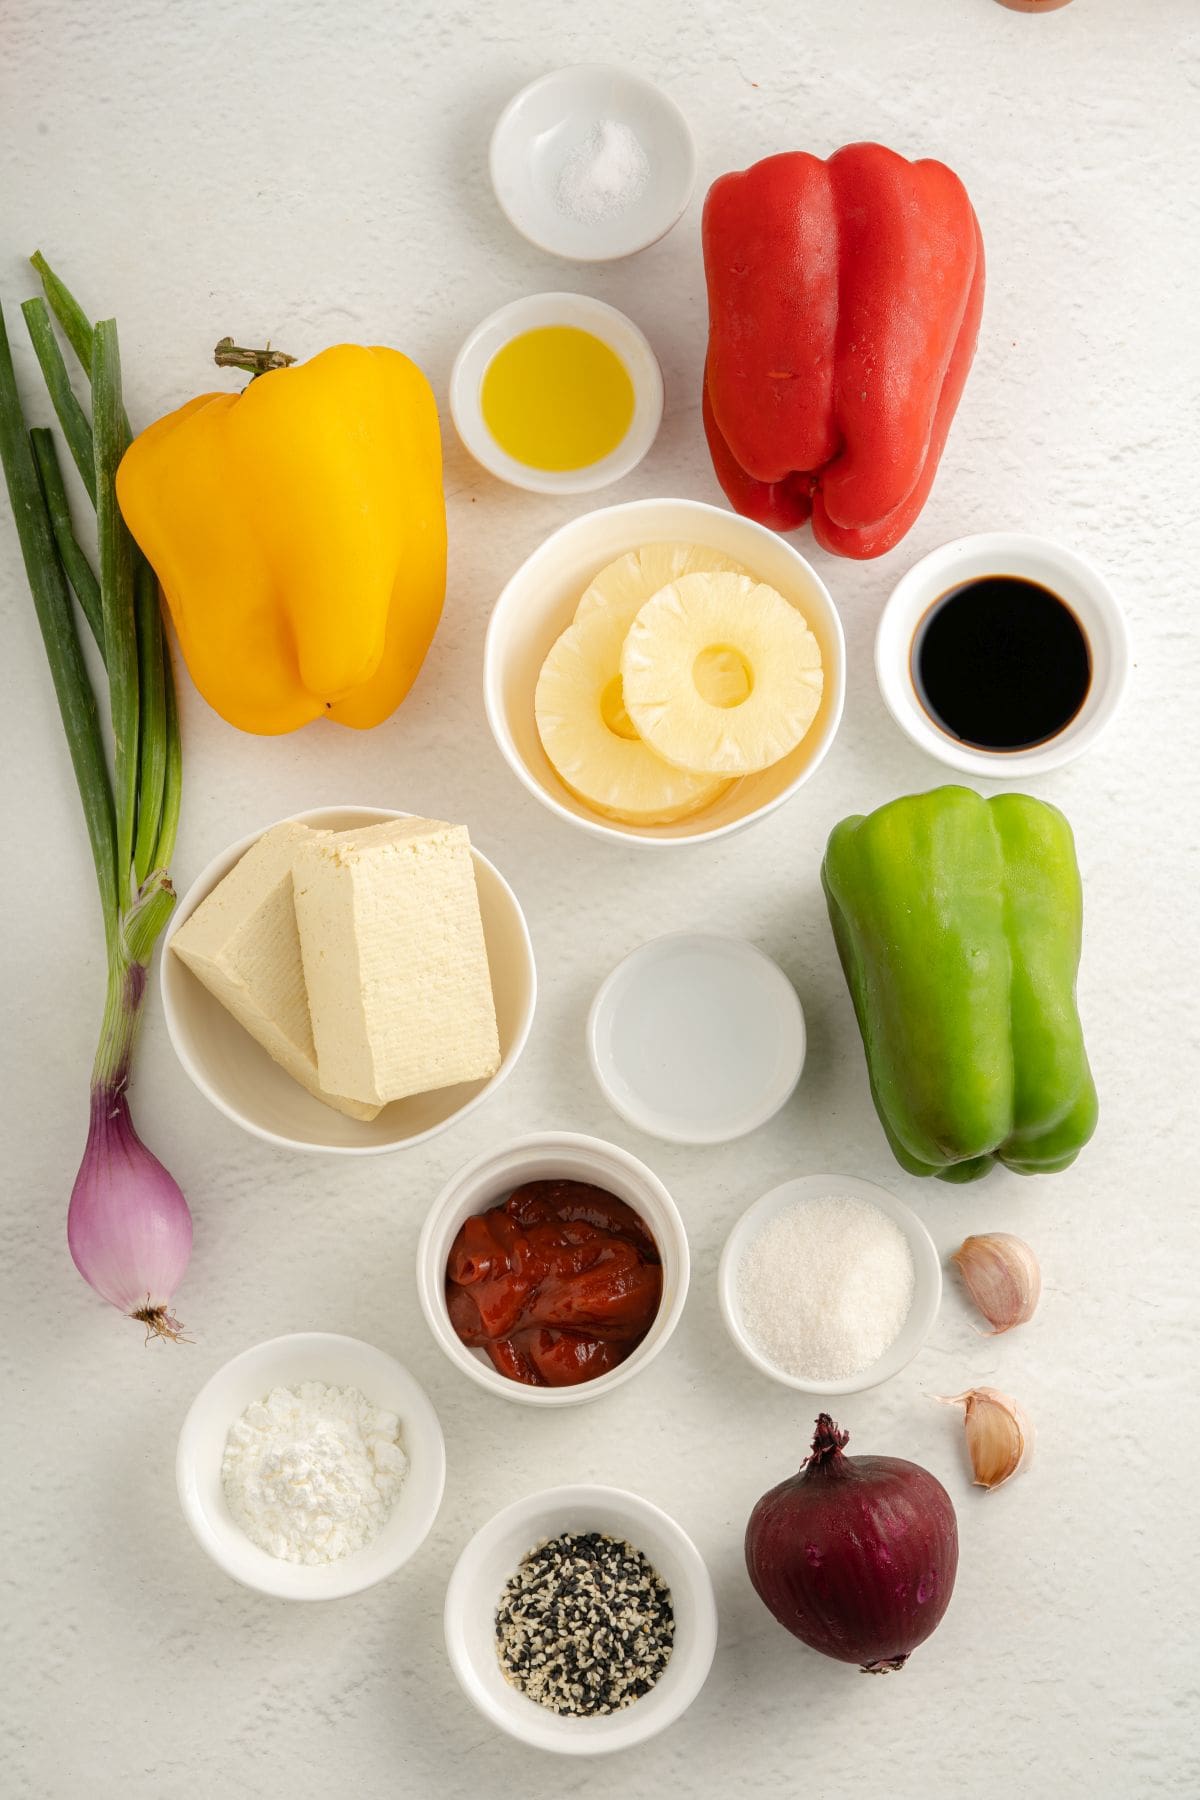 Sweet and Sour Tofu Ingredients